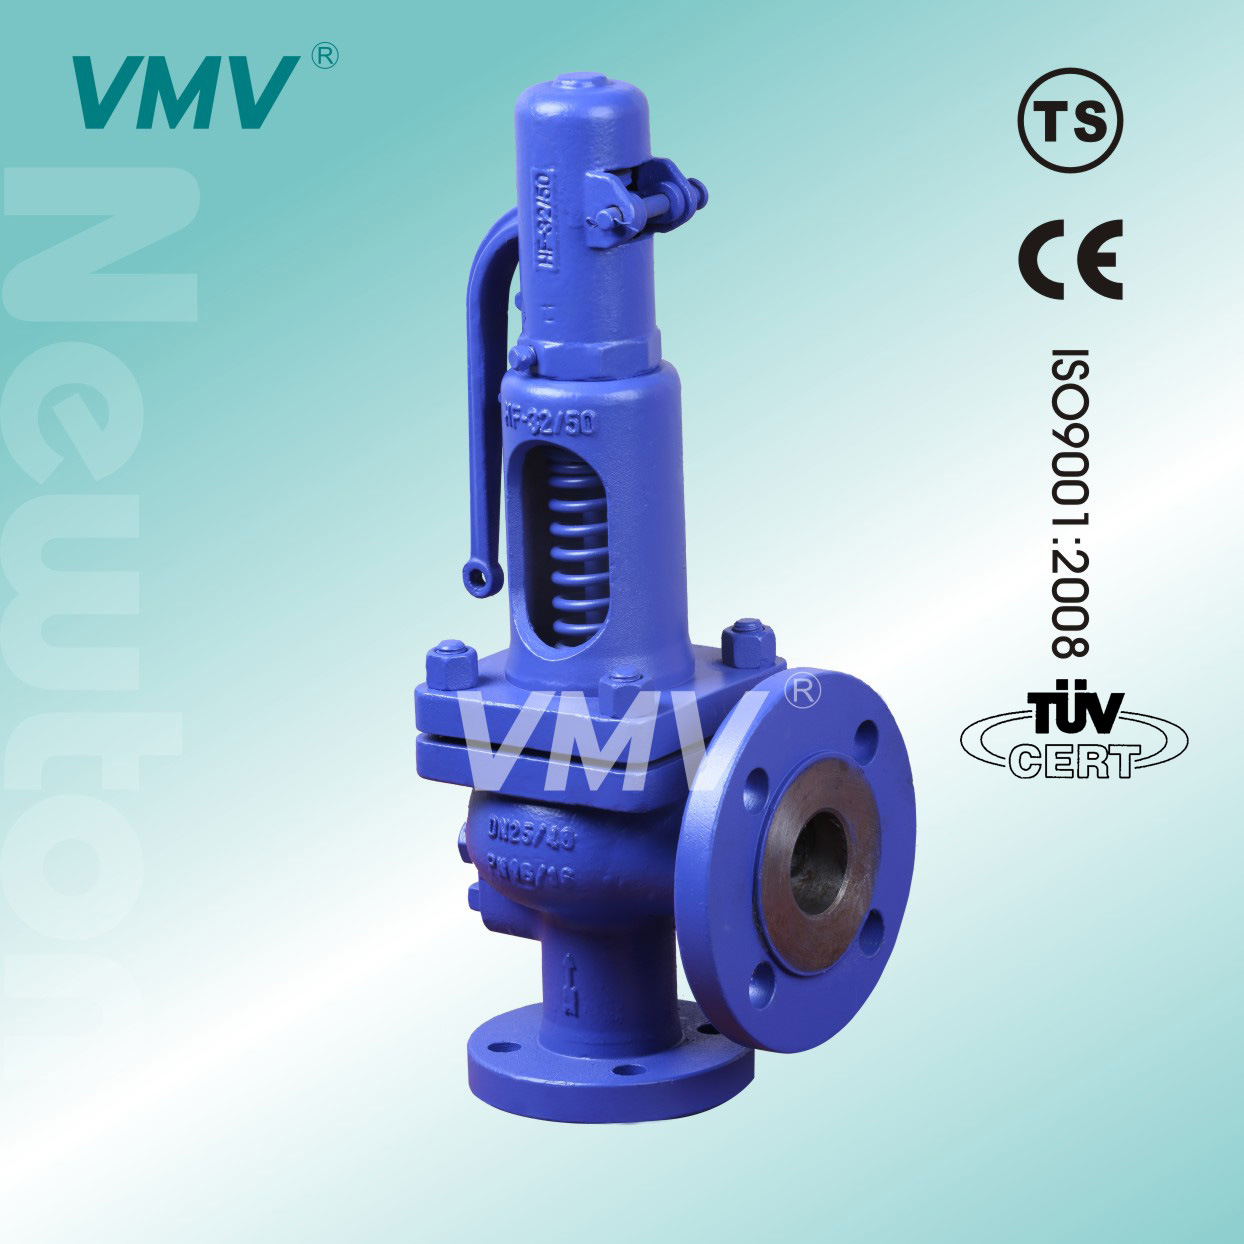 Factory Price High Quality Safety Valve